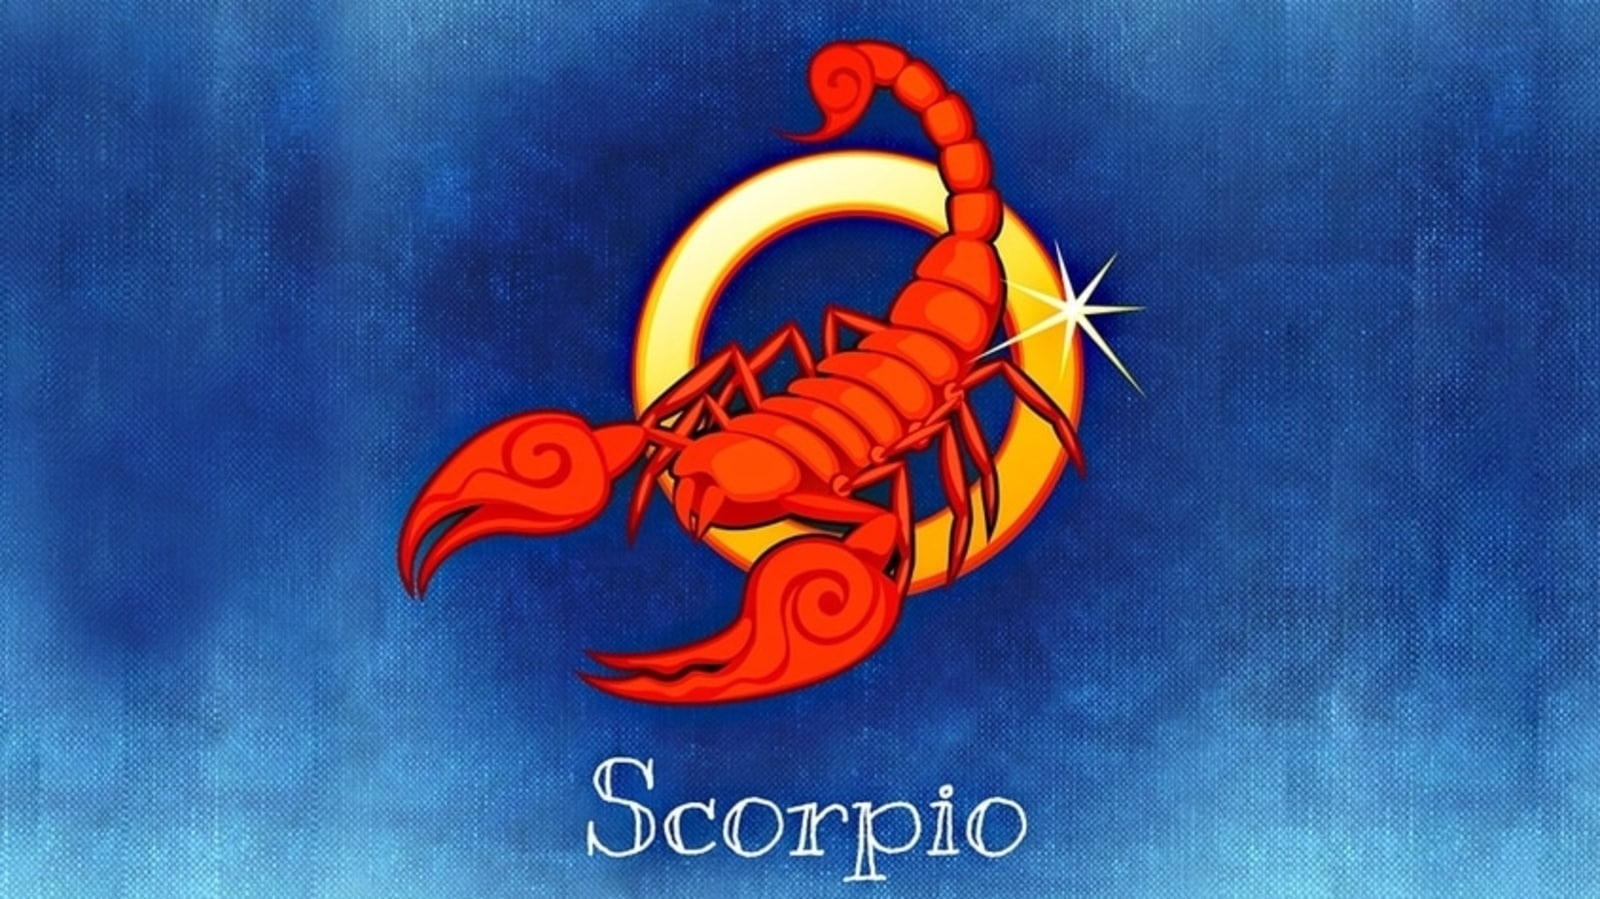 Scorpio Daily Horoscope: Astrological Prediction for August 29